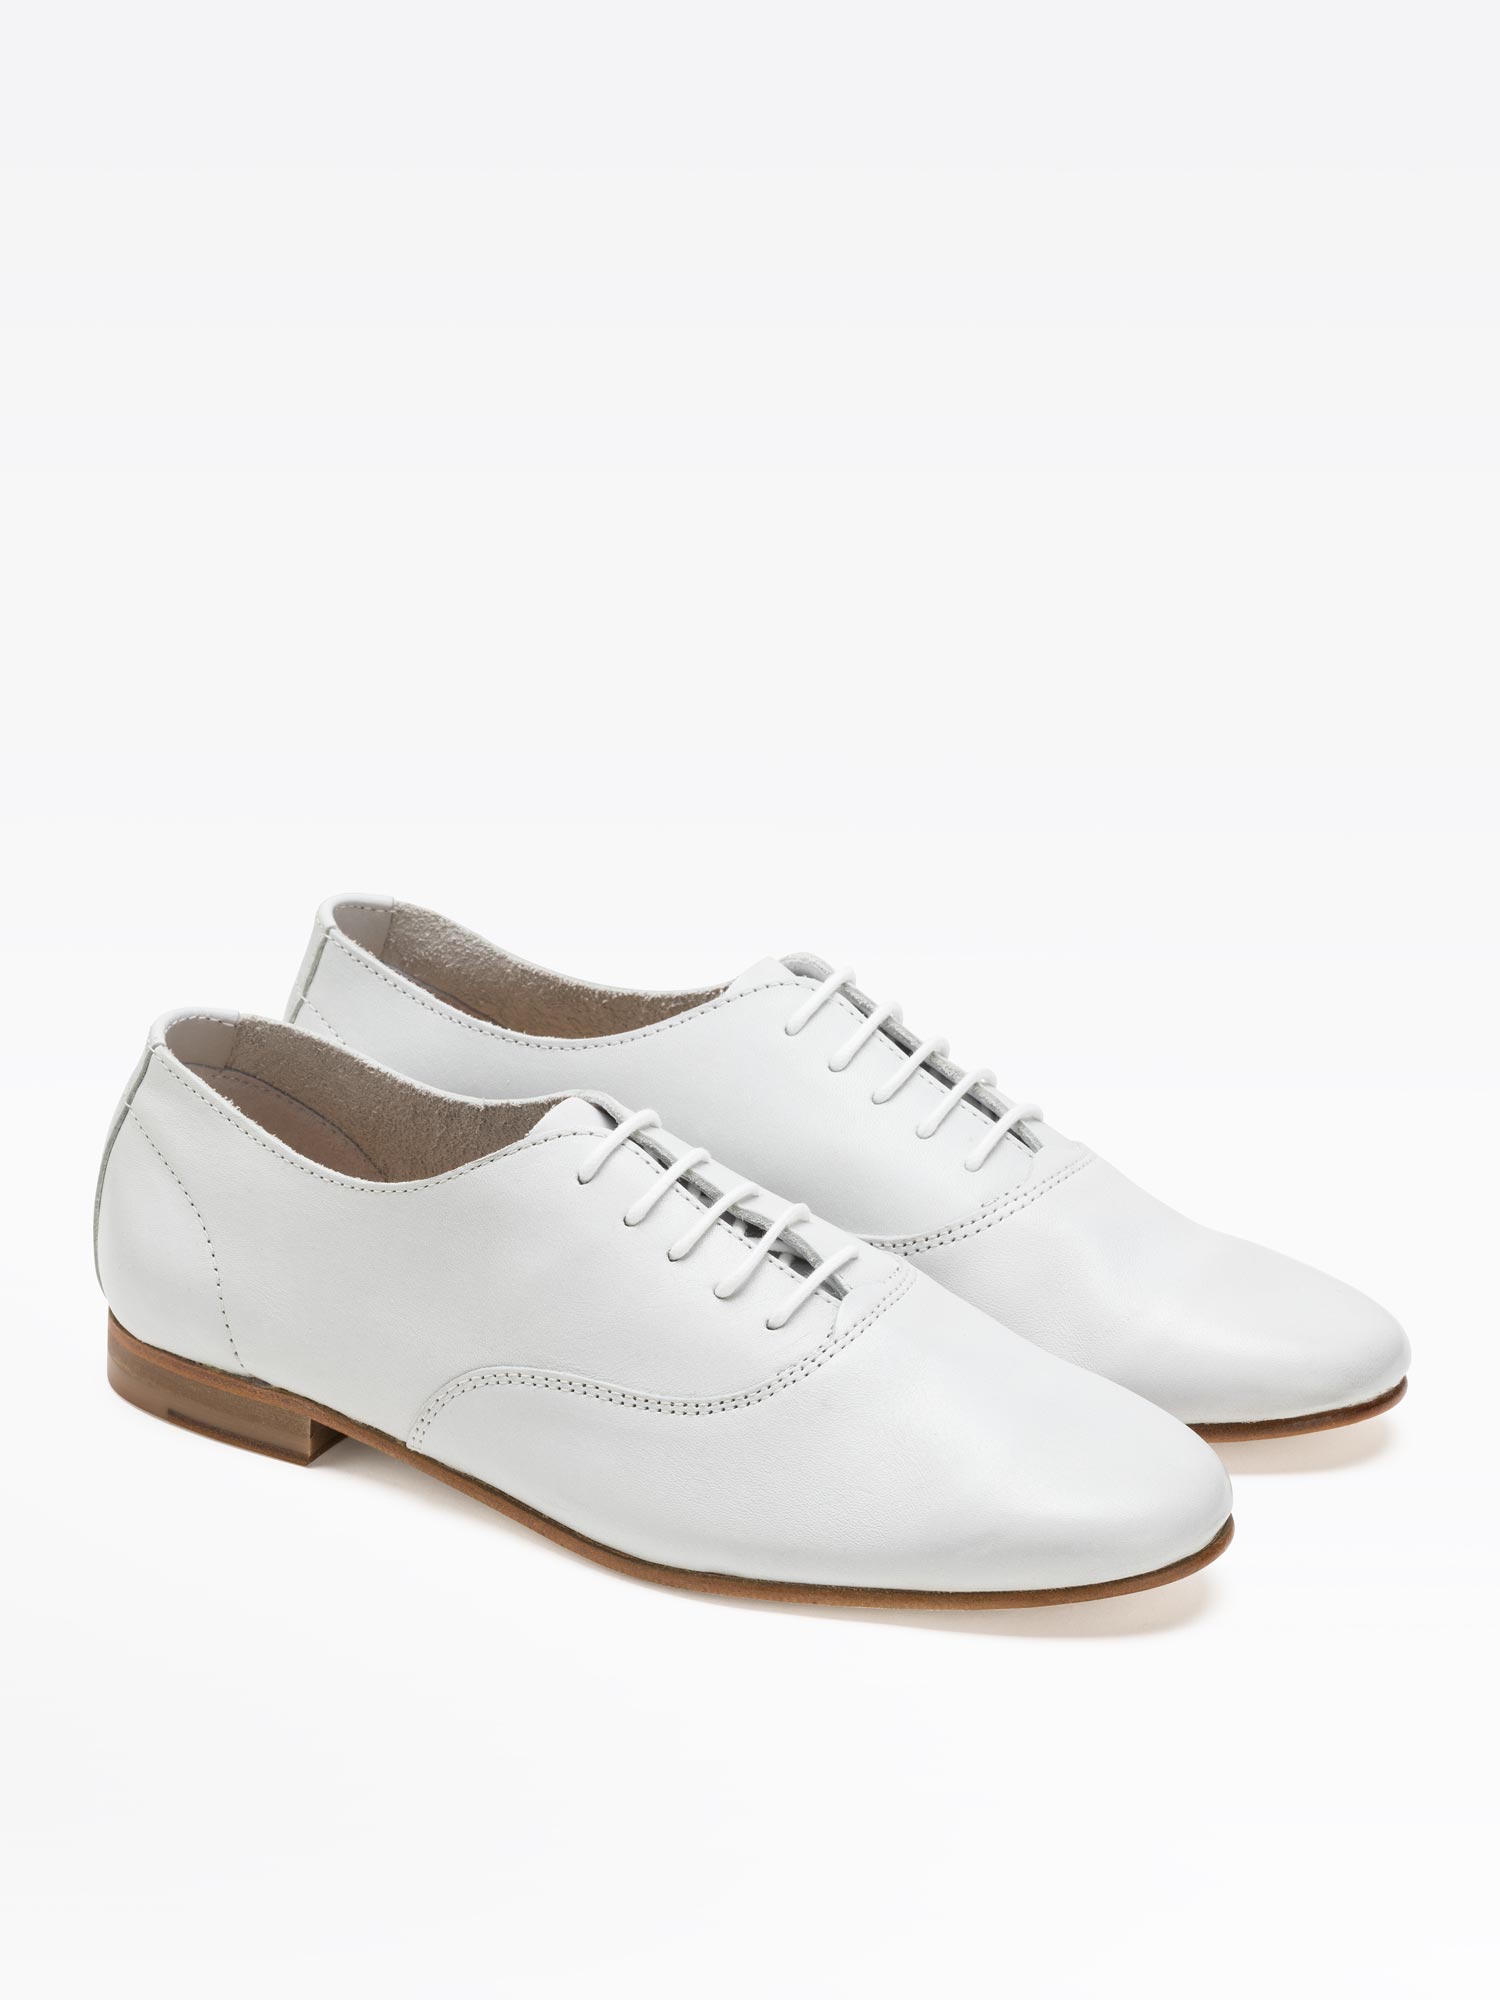 white leather alix oxford shoes